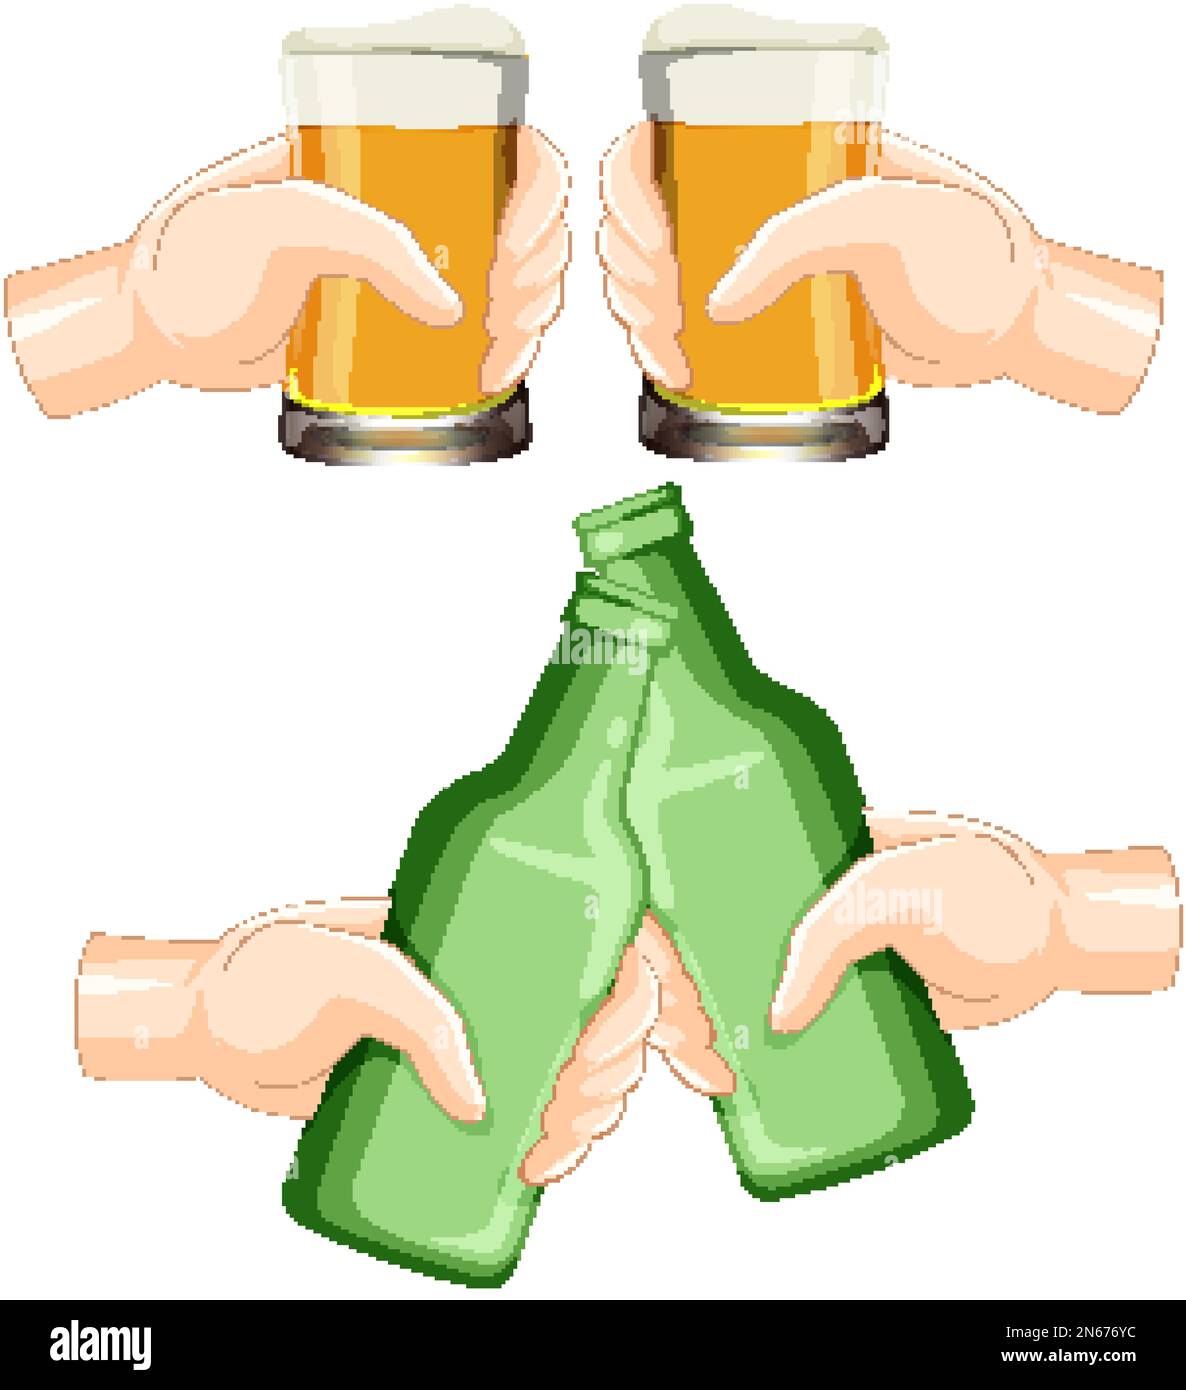 Clinking beers hands holding beer glasses illustration Stock Vector